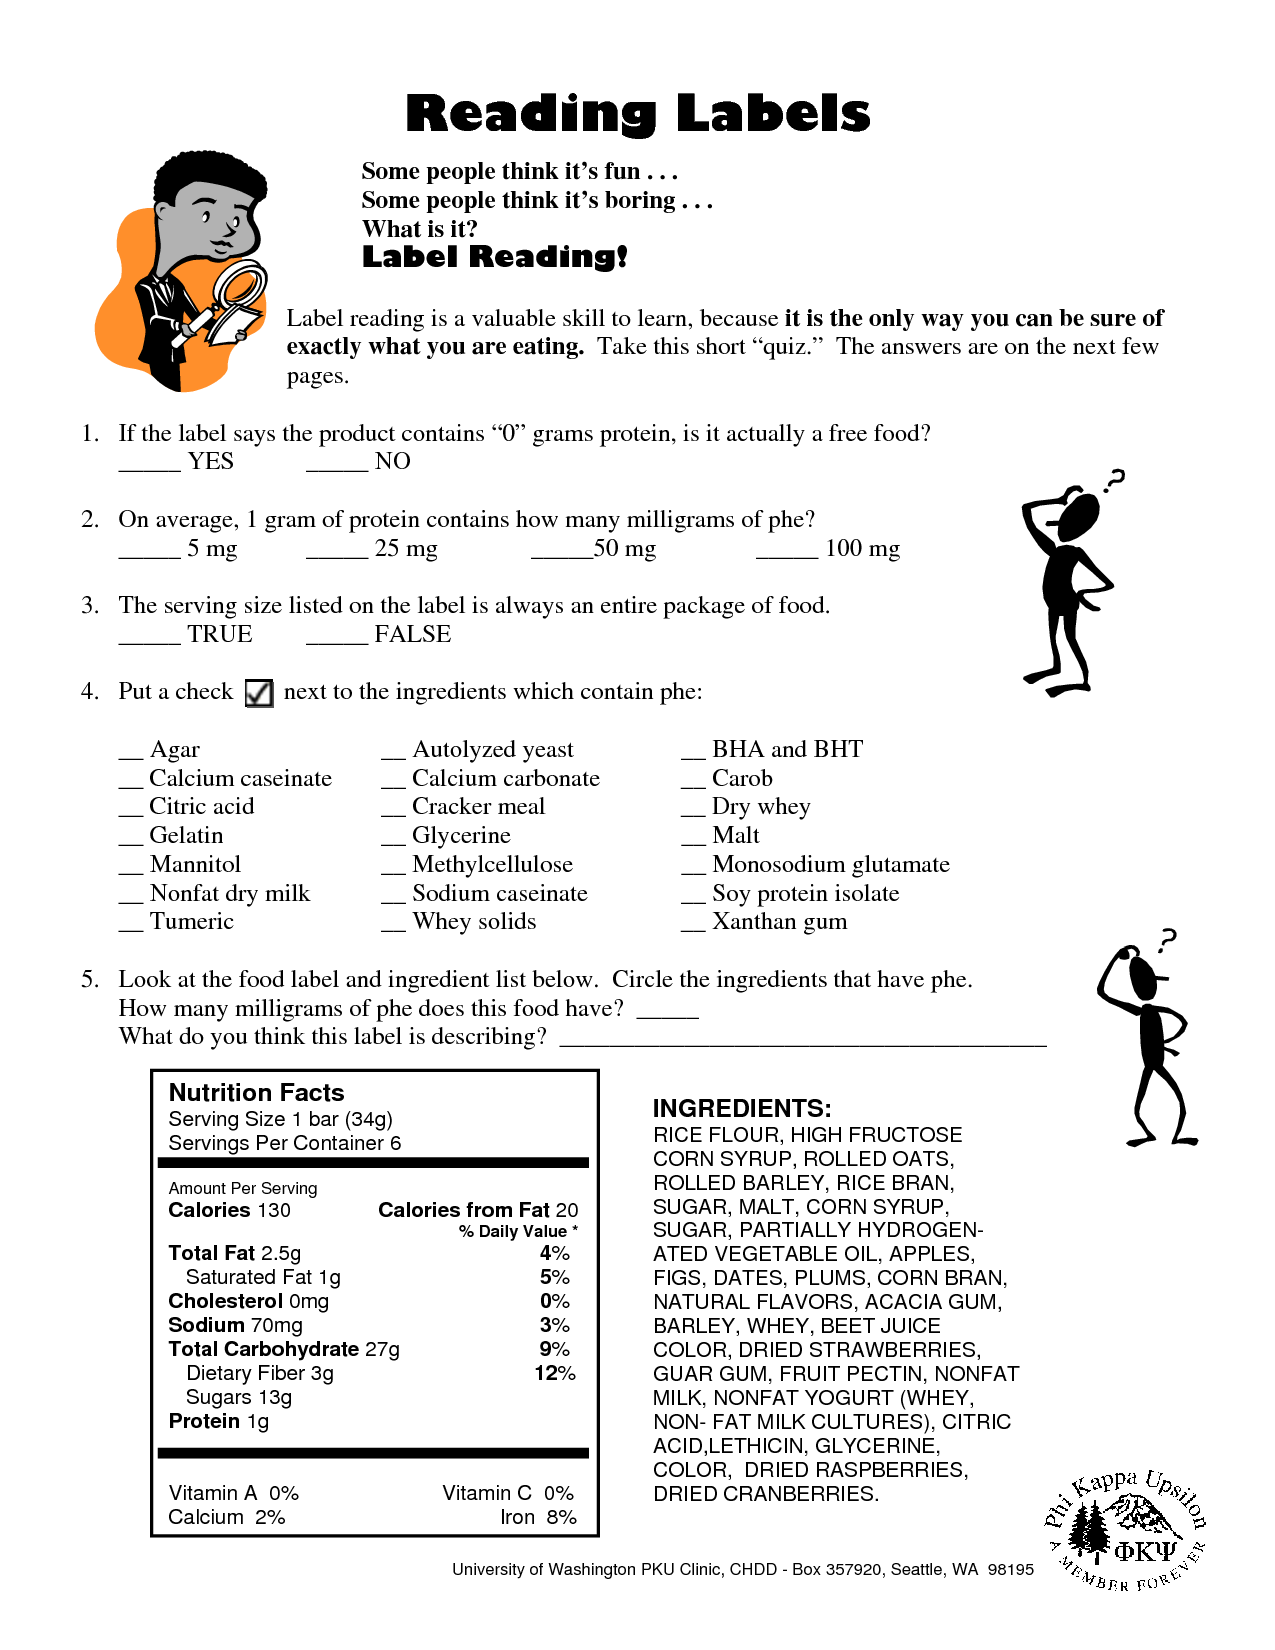 16 Images of Reading Labels Worksheets With Questions